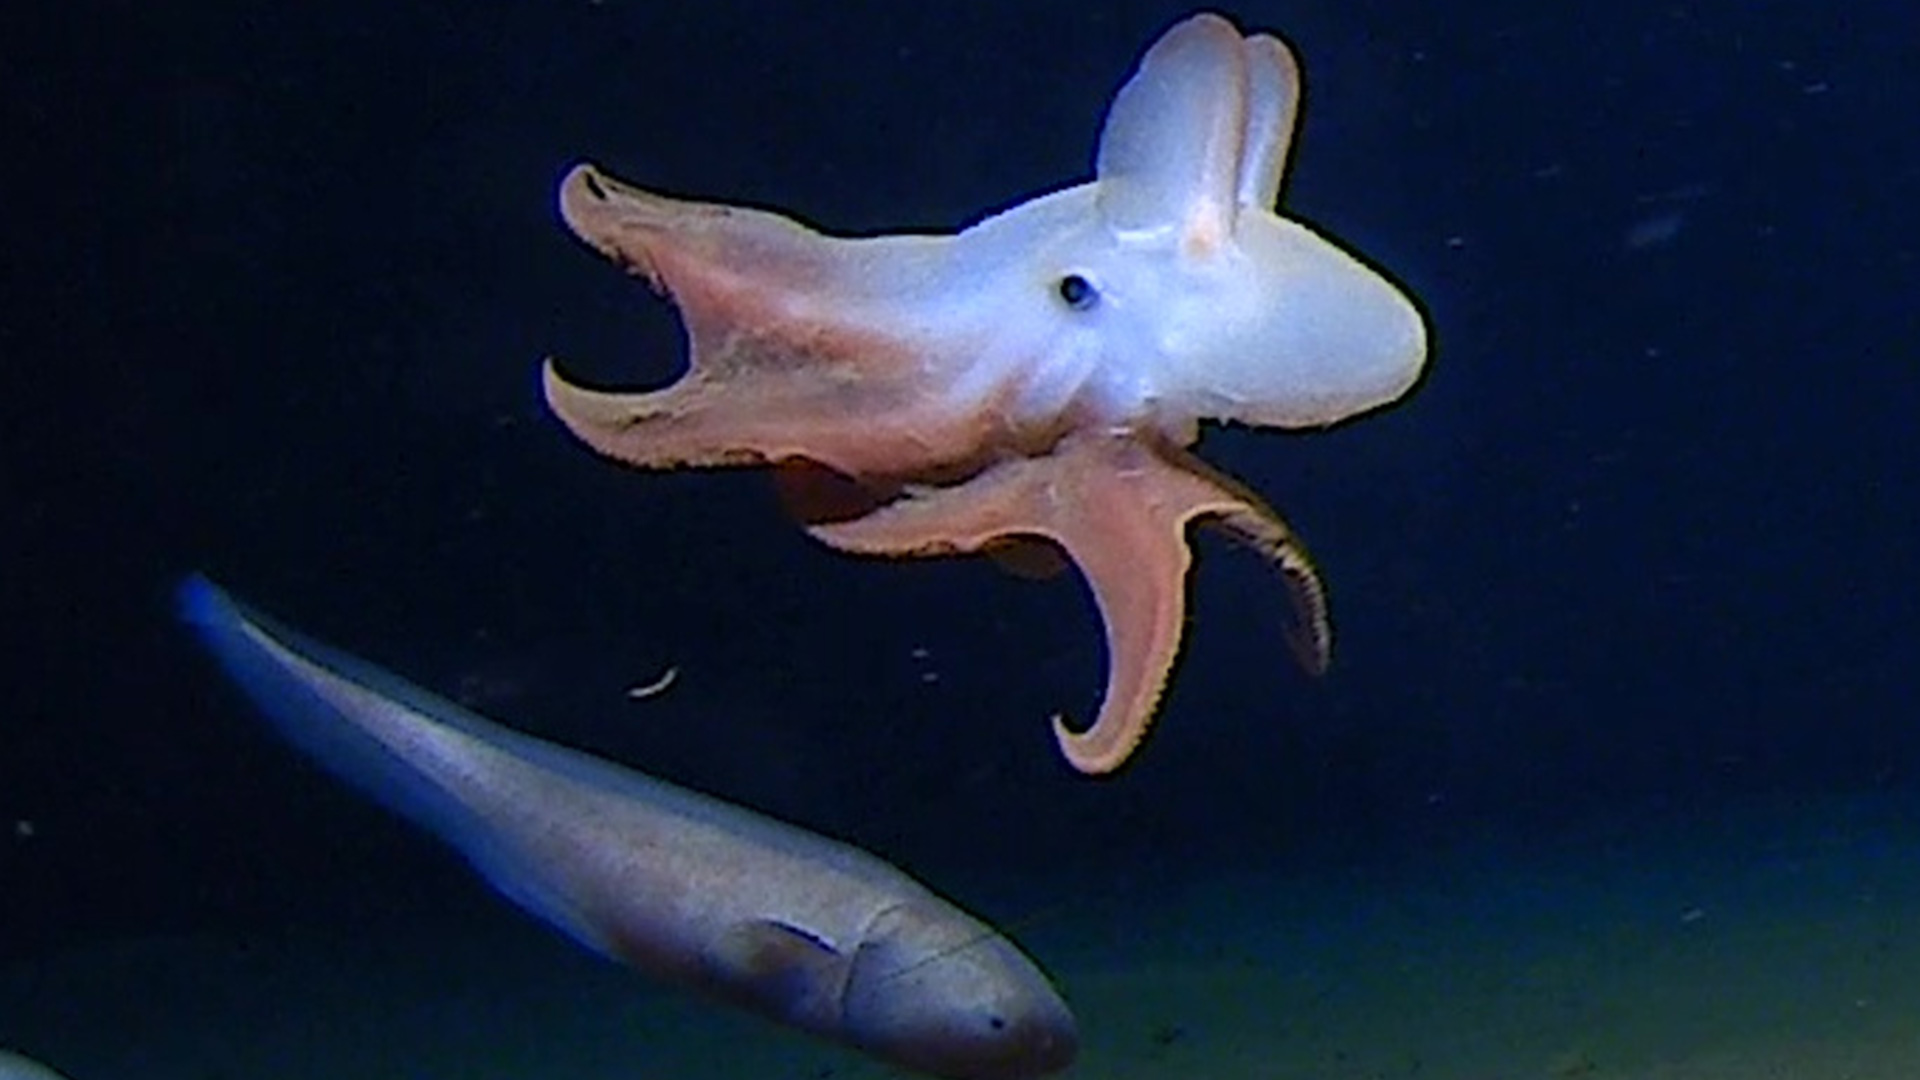 World’s Deepest Diving Octopus Discovered at 6,957 Meters During Five Deeps Expedition